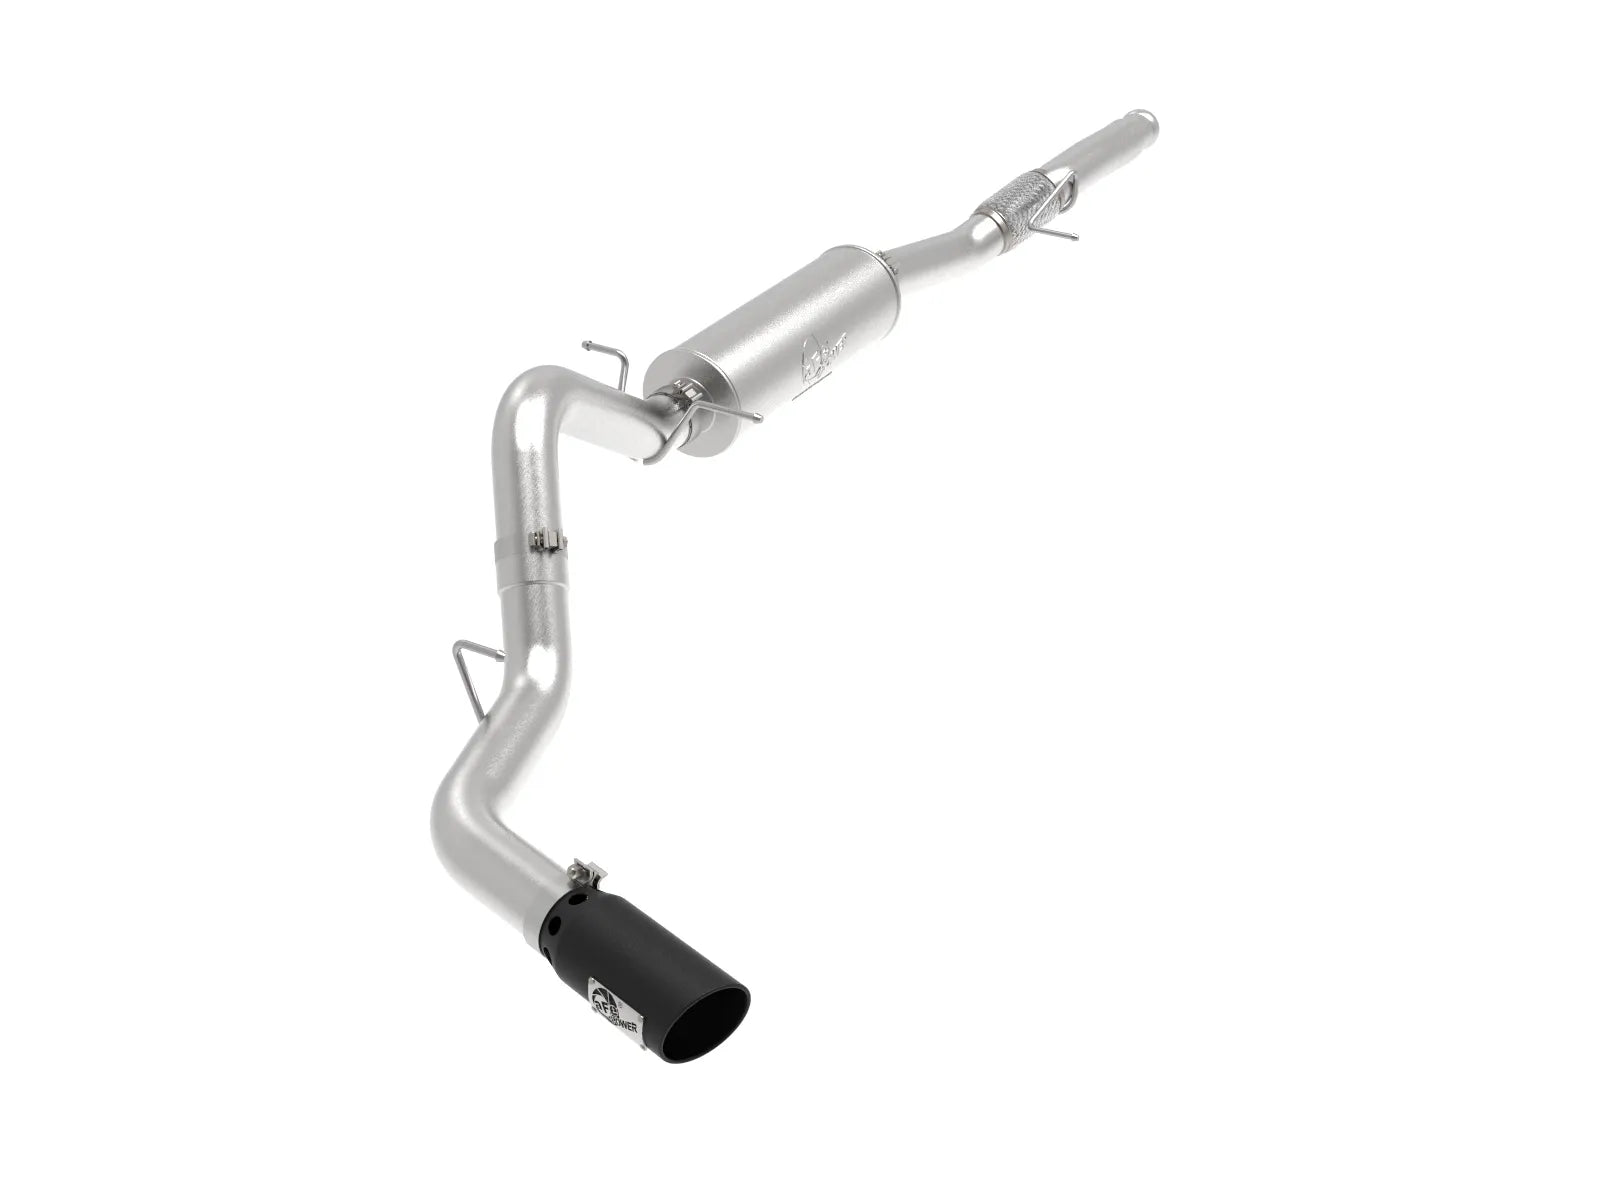 aFe Apollo GT Series Cat-Back Exhaust System Black Tip for 2014-2018 Chevy Silverado 1500 (49-44116-B)